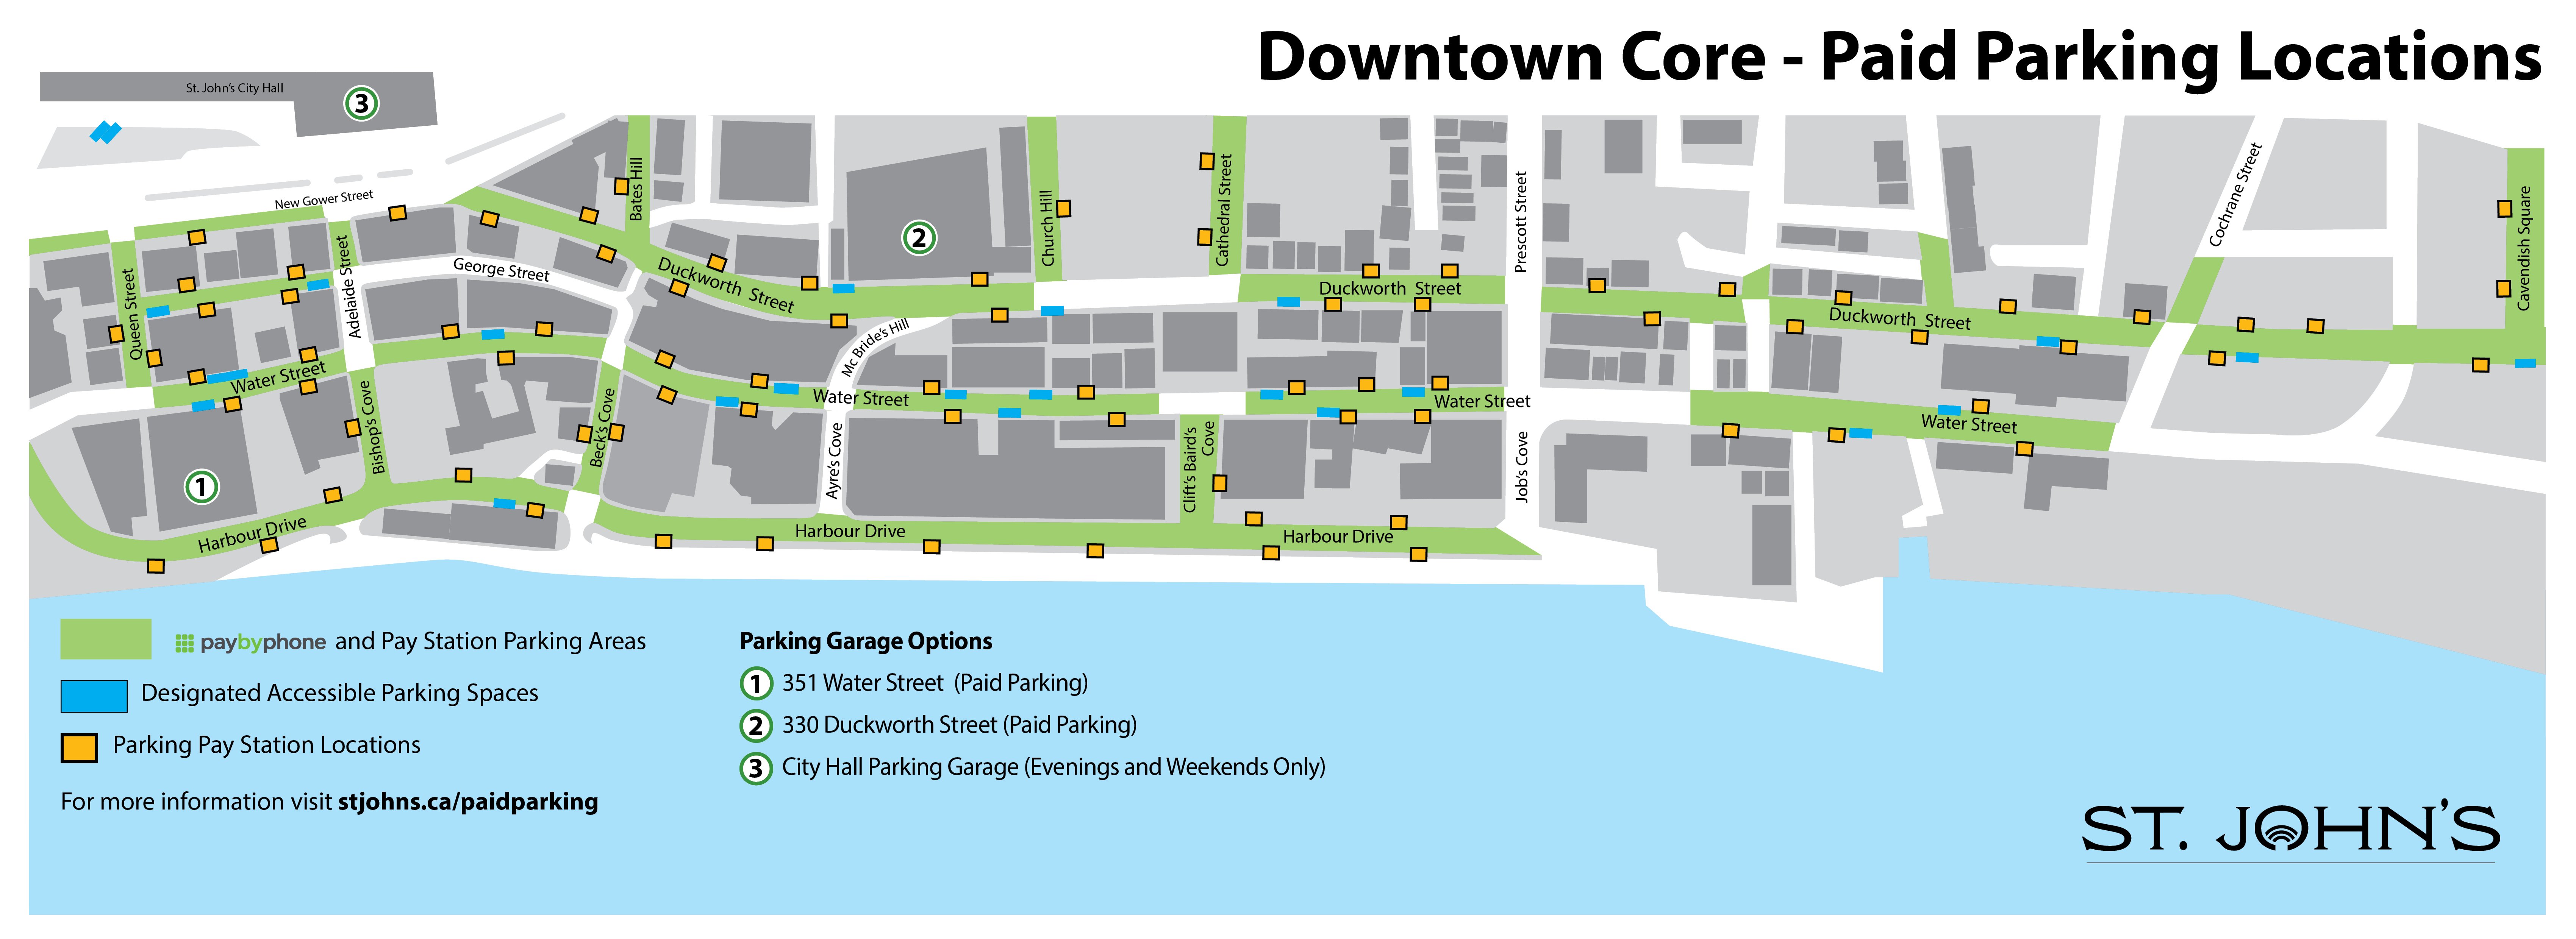 A map of St. John's downtown core parking areas including Pay by Phone areas and Parking Pay Station locations